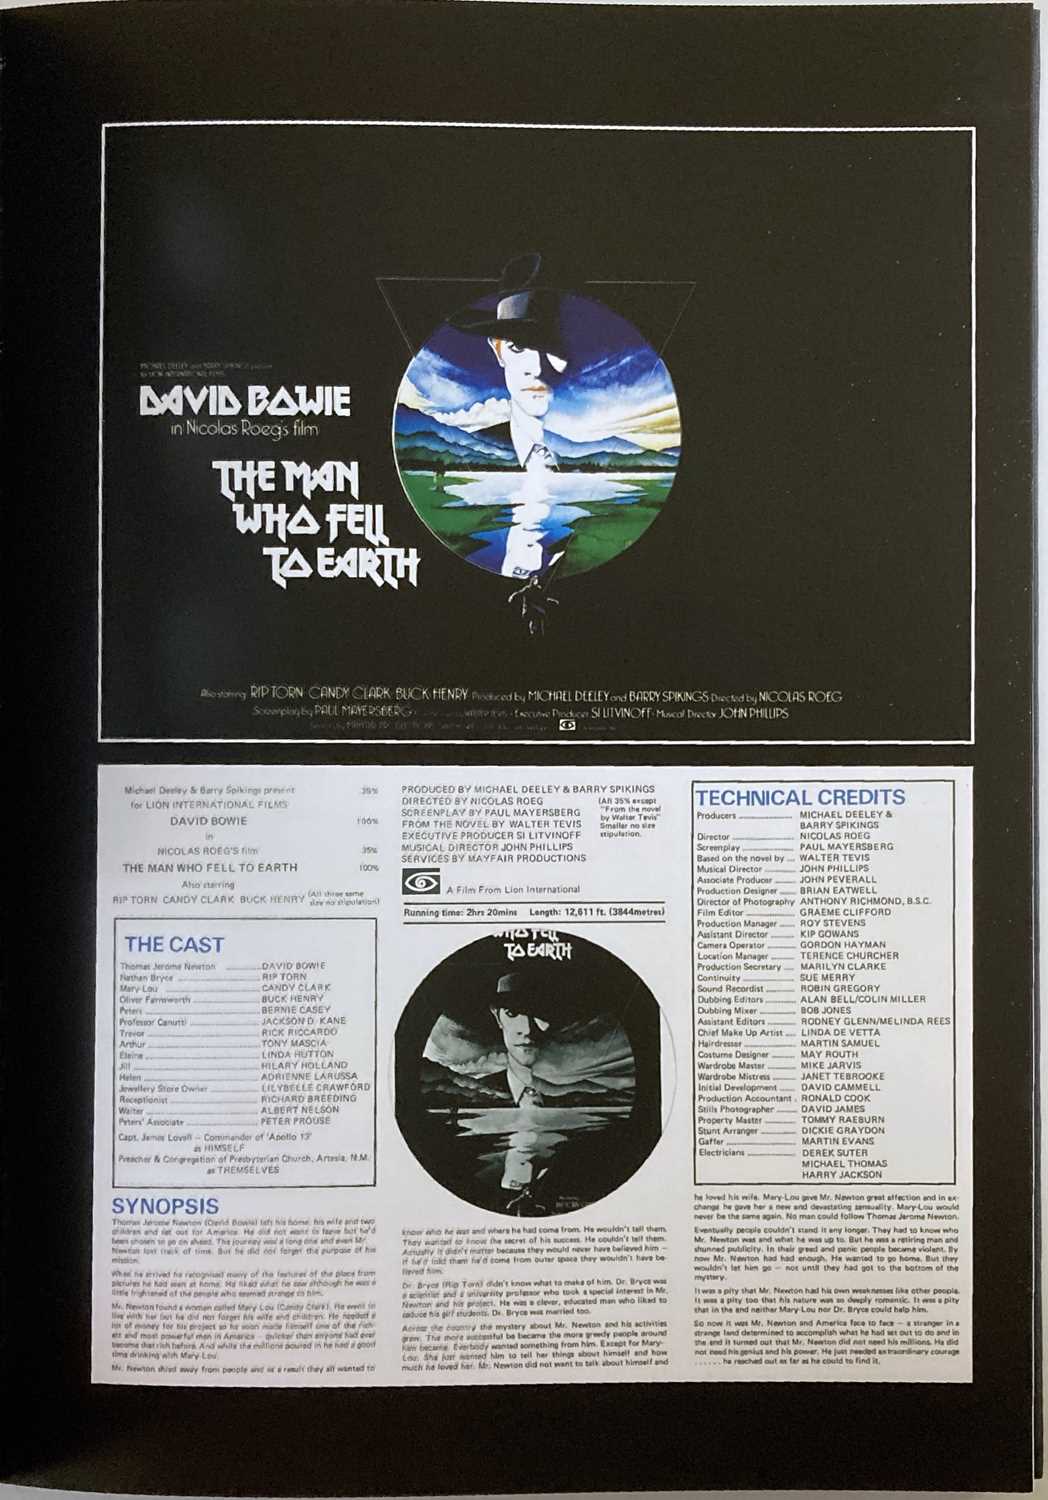 DAVID BOWIE - THE MAN WHO FELL TO EARTH STUDIO CANAL LTD EDITION BOOK. - Image 6 of 6